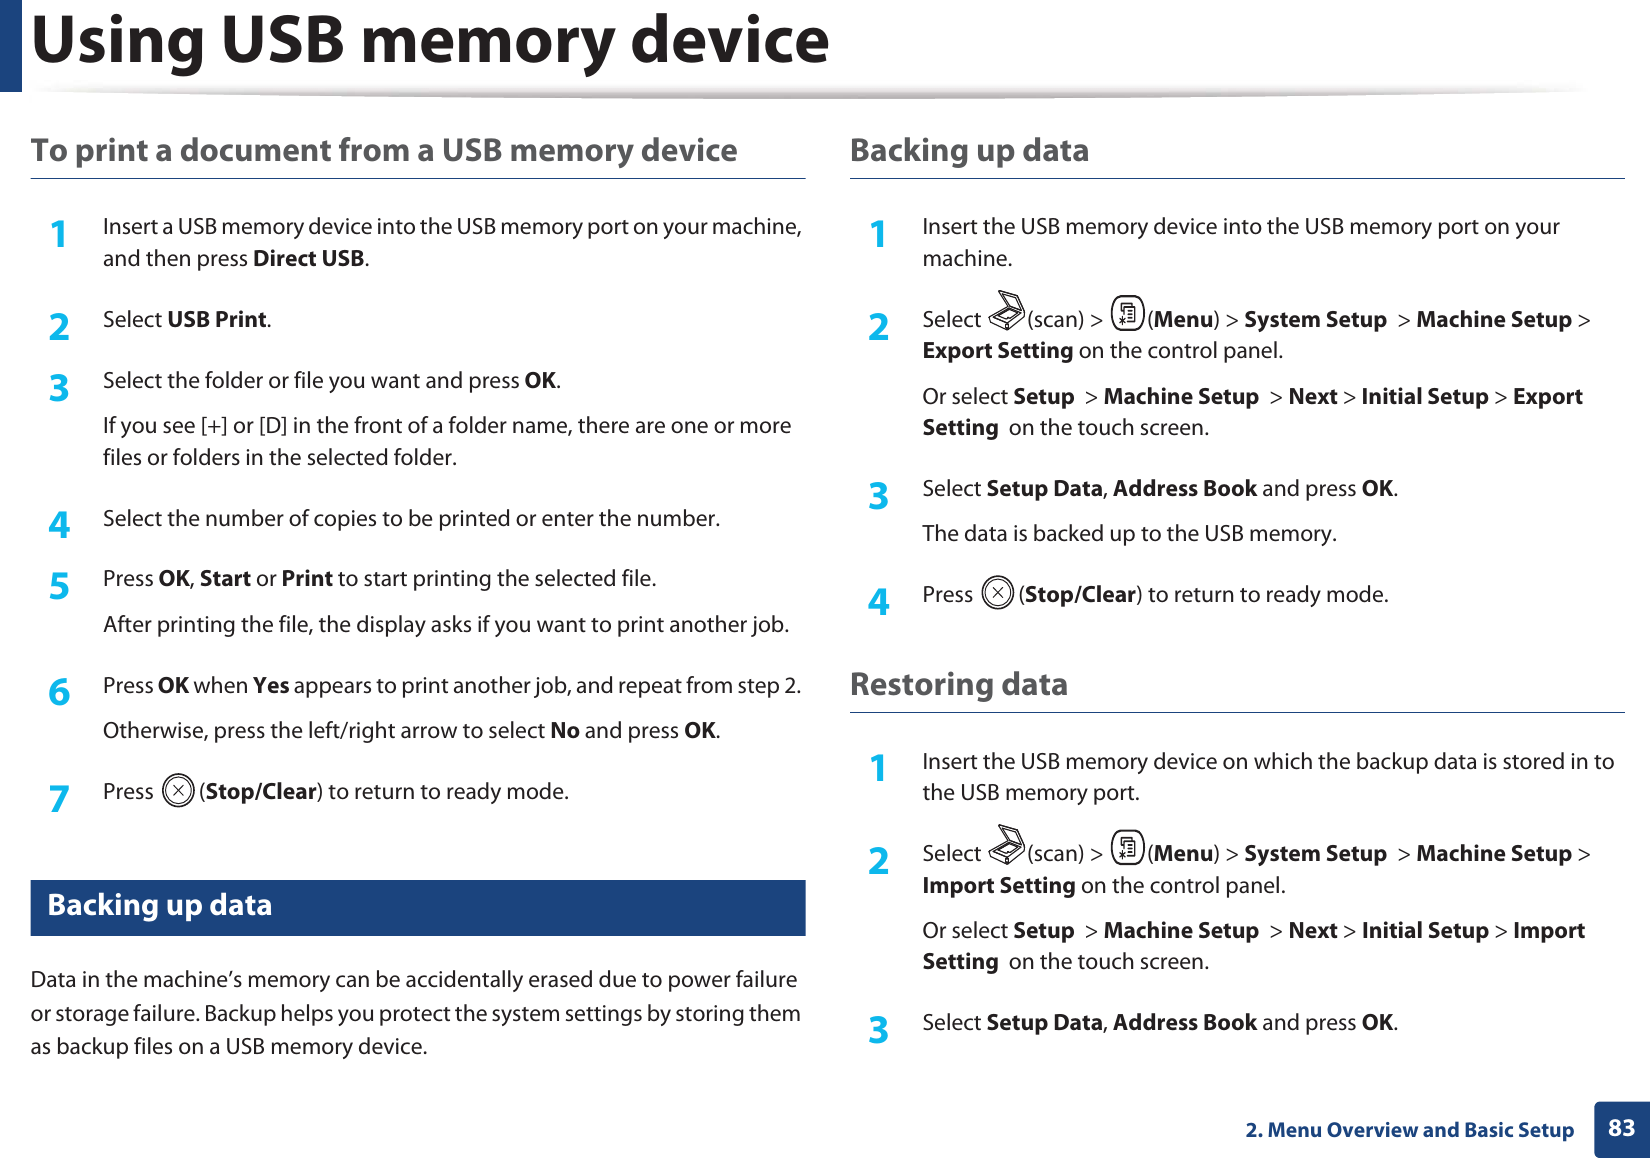 Using USB memory device832. Menu Overview and Basic SetupTo print a document from a USB memory device1Insert a USB memory device into the USB memory port on your machine, and then press Direct USB.2  Select USB Print.3  Select the folder or file you want and press OK.If you see [+] or [D] in the front of a folder name, there are one or more files or folders in the selected folder.4  Select the number of copies to be printed or enter the number.5  Press OK, Start or Print to start printing the selected file. After printing the file, the display asks if you want to print another job.6  Press OK when Yes appears to print another job, and repeat from step 2. Otherwise, press the left/right arrow to select No and press OK.7  Press (Stop/Clear) to return to ready mode.28 Backing up data Data in the machine’s memory can be accidentally erased due to power failure or storage failure. Backup helps you protect the system settings by storing them as backup files on a USB memory device.Backing up data1Insert the USB memory device into the USB memory port on your machine.2  Select (scan) &gt; (Menu) &gt; System Setup  &gt; Machine Setup &gt; Export Setting on the control panel.Or select Setup  &gt; Machine Setup  &gt; Next &gt; Initial Setup &gt; Export Setting  on the touch screen.3  Select Setup Data, Address Book and press OK. The data is backed up to the USB memory.4  Press (Stop/Clear) to return to ready mode.Restoring data1Insert the USB memory device on which the backup data is stored in to the USB memory port.2  Select (scan) &gt; (Menu) &gt; System Setup  &gt; Machine Setup &gt; Import Setting on the control panel.Or select Setup  &gt; Machine Setup  &gt; Next &gt; Initial Setup &gt; Import Setting  on the touch screen.3  Select Setup Data, Address Book and press OK. 